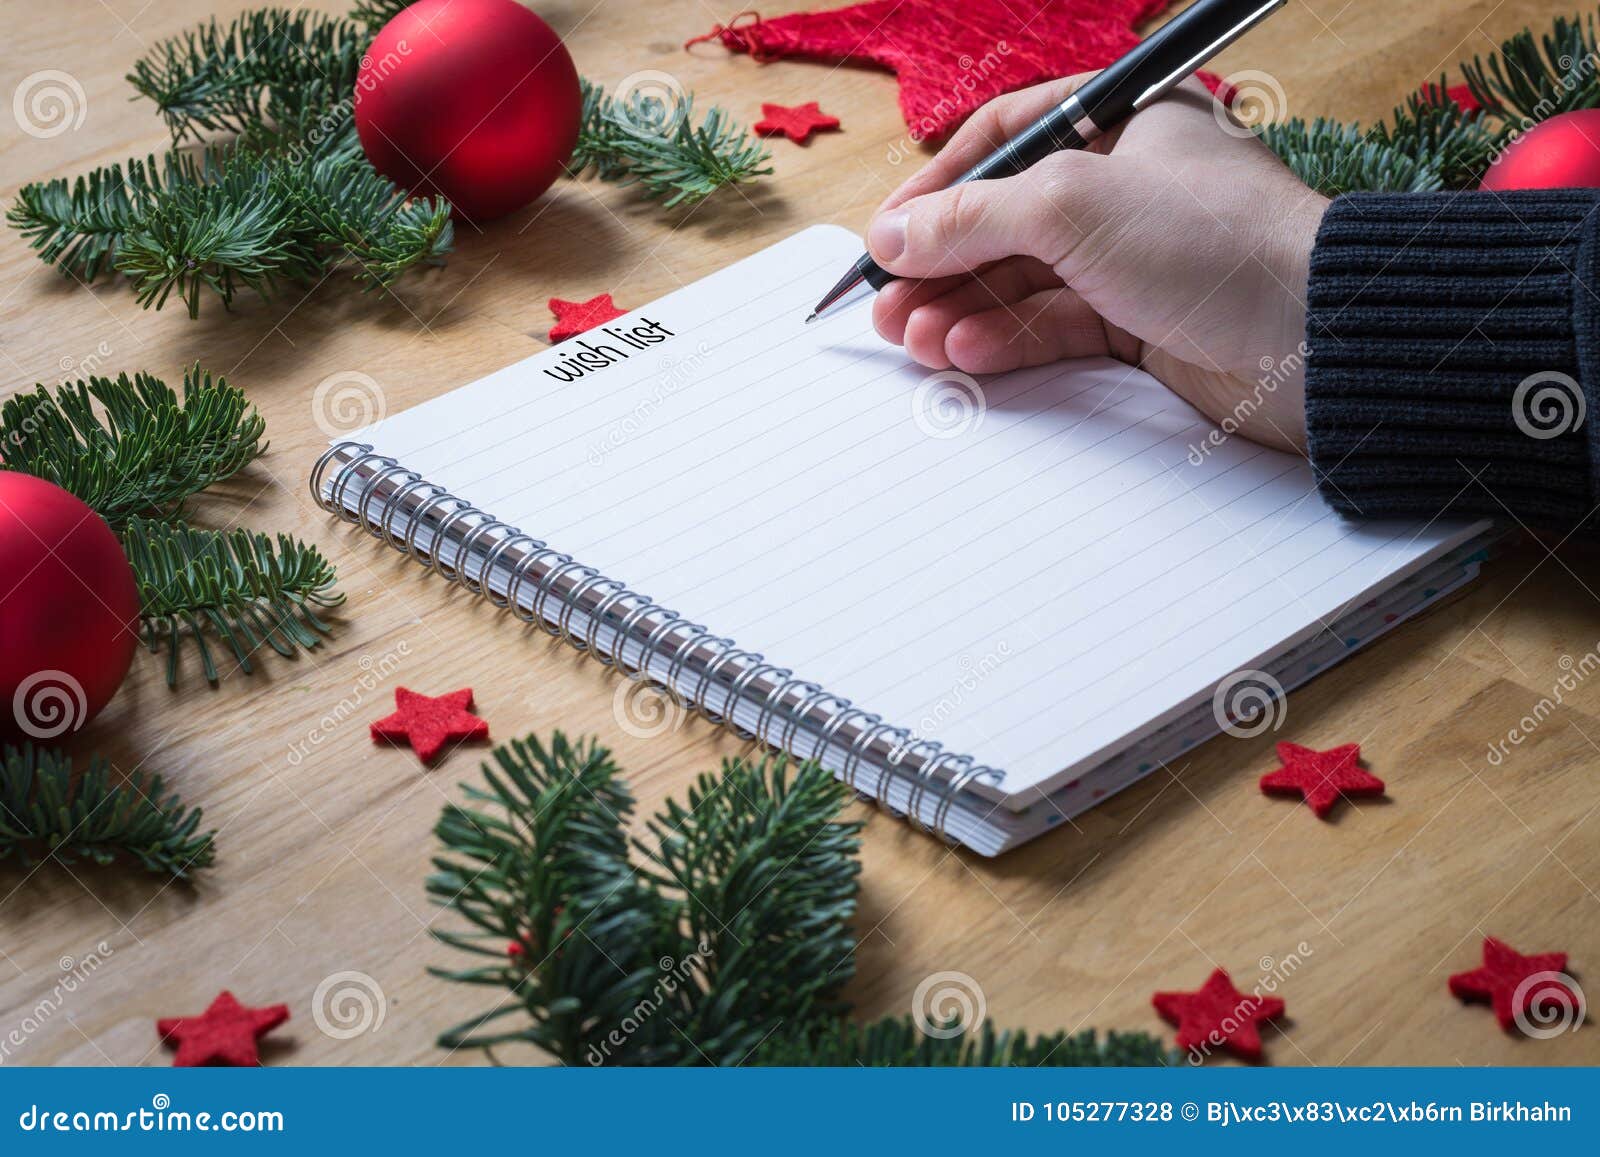 Writing a Wish List for Christmas on a Notepad with Christmas De ...